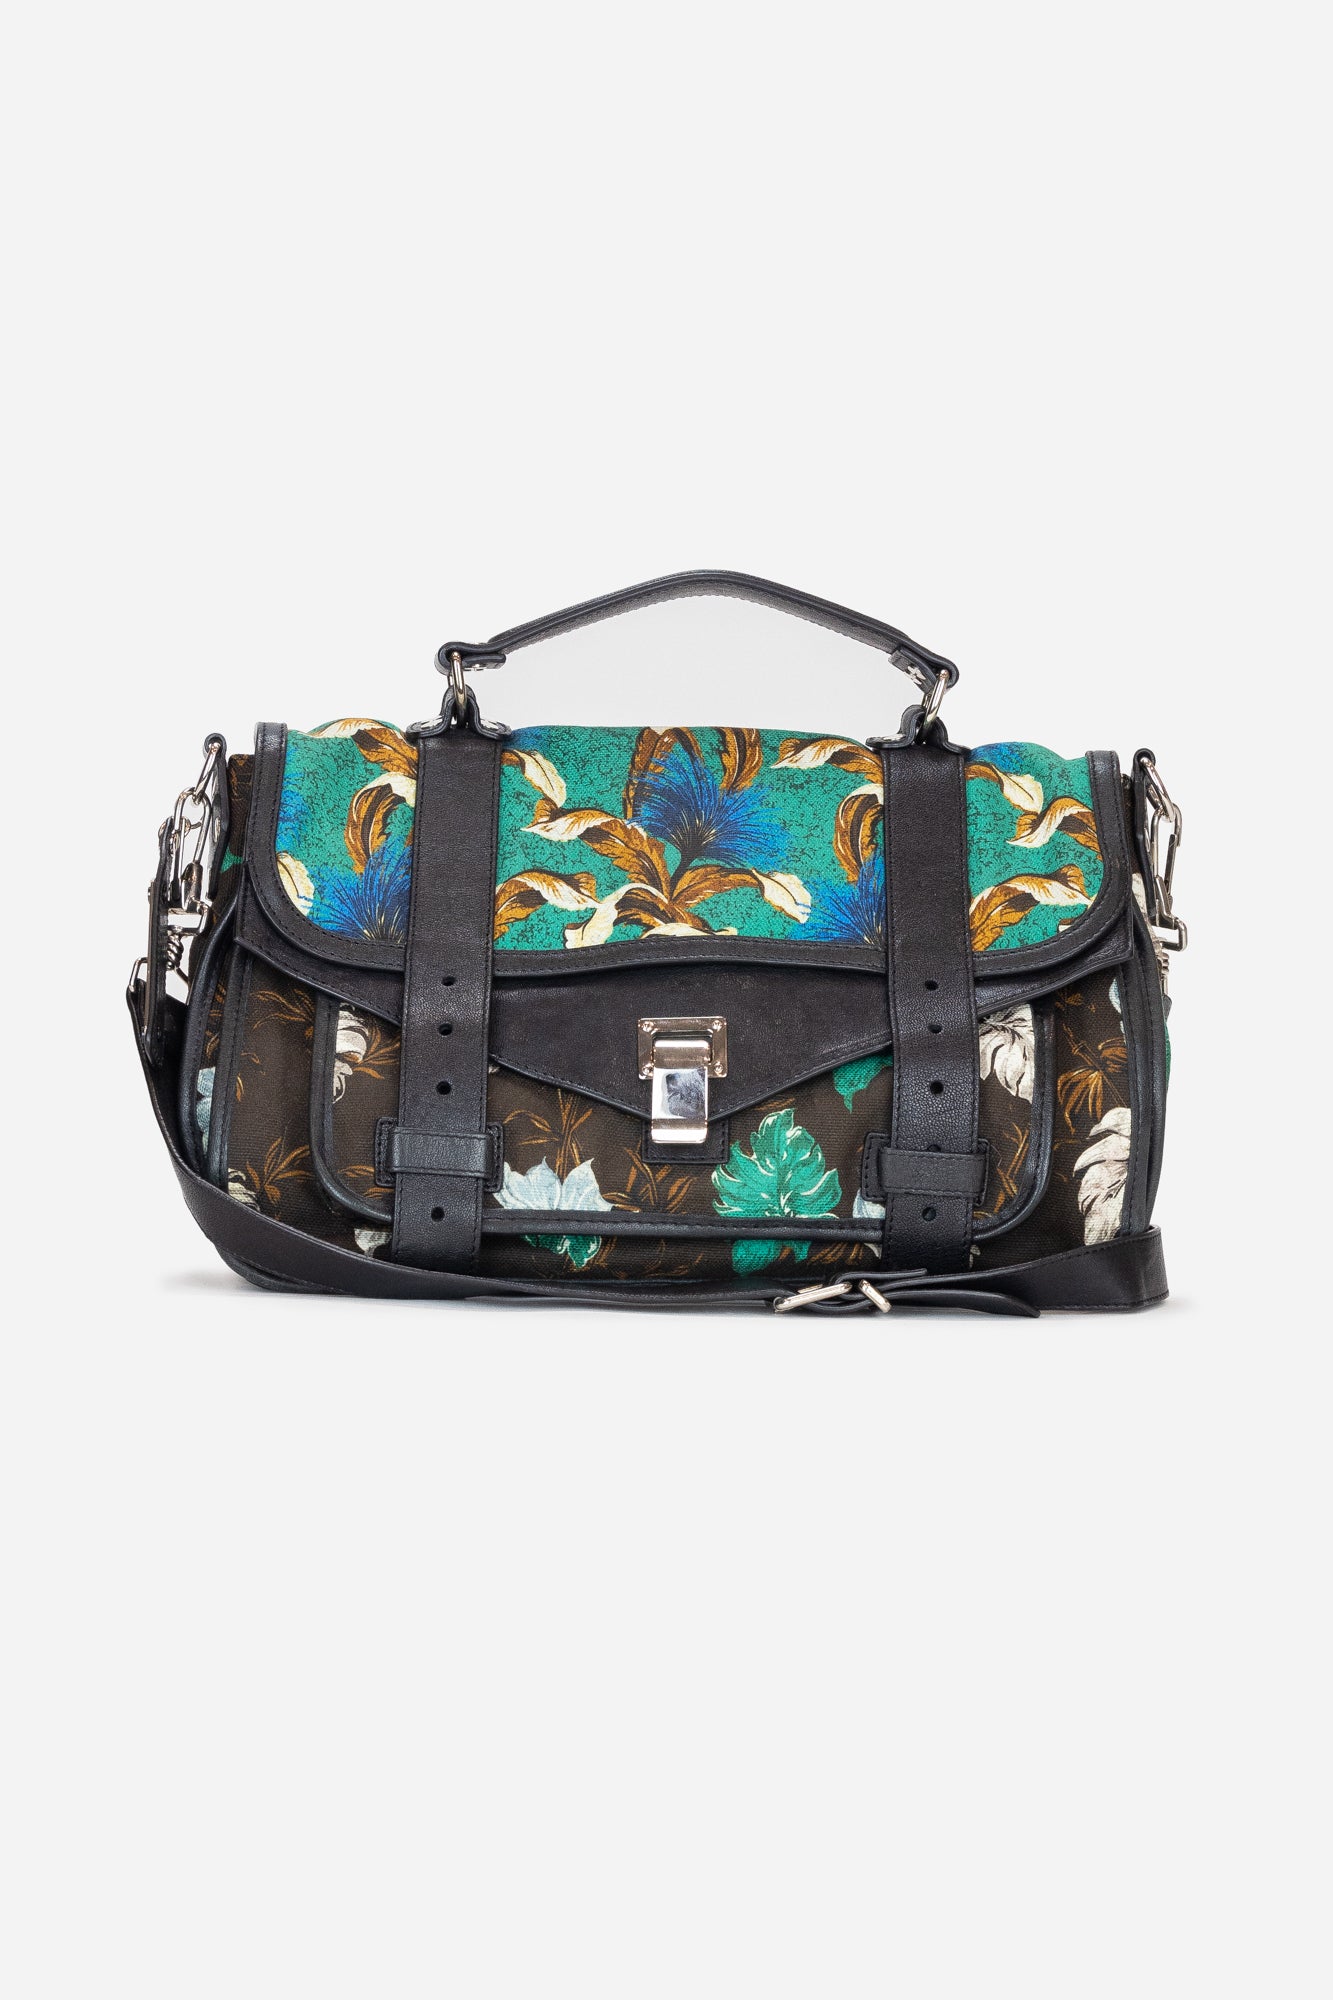 Floral Printed S1 Medium Shoulder Bag - So Over It Luxury Consignment